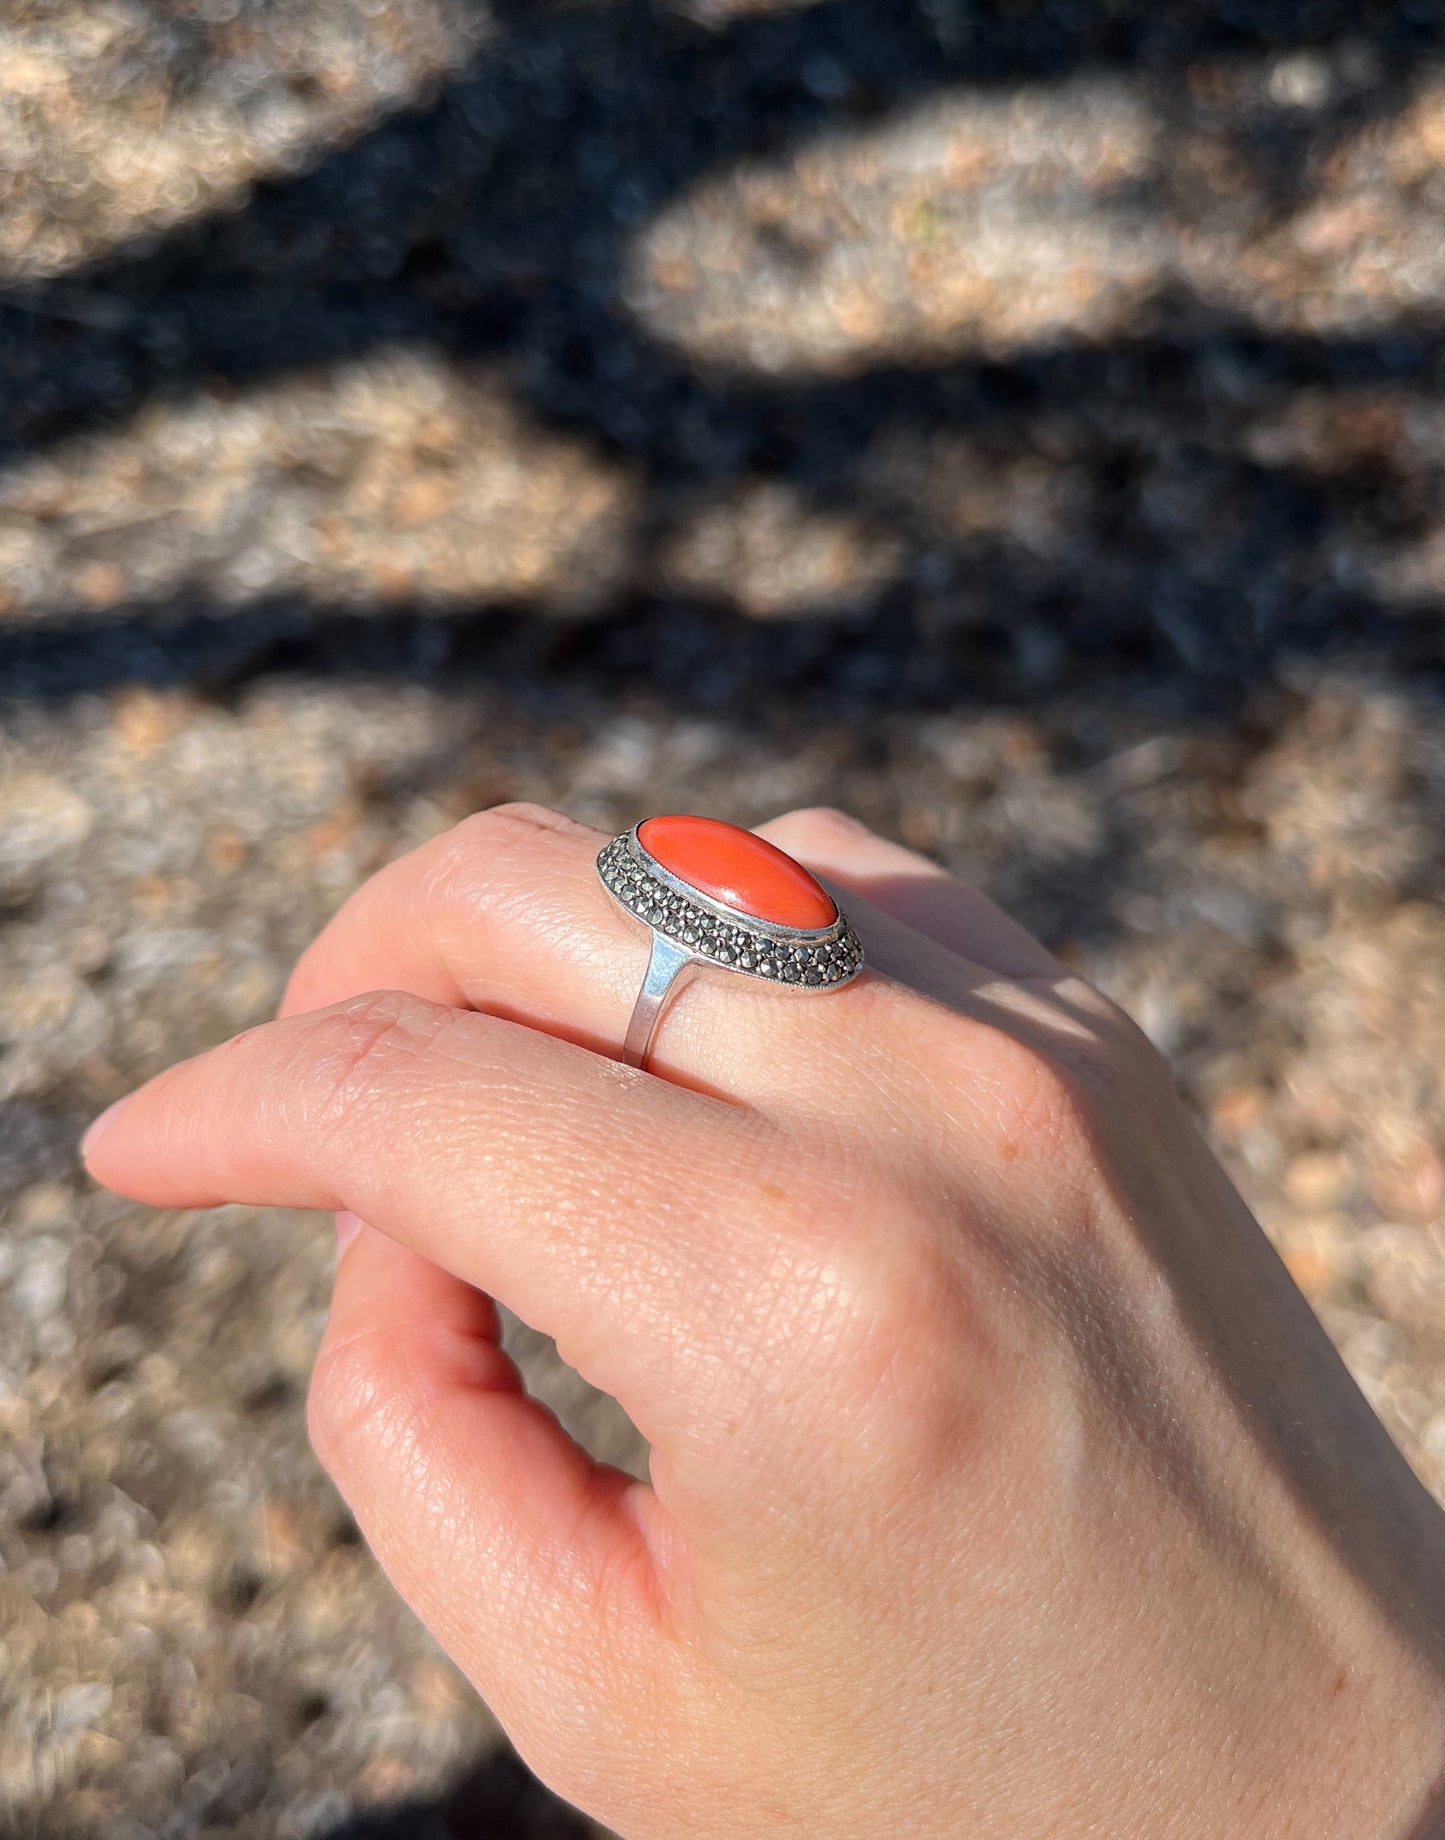 Antique Art Deco Coral Statement Silver Ring w. natural Marcasite crystals (Germany 1930s) US size 6 w. Hardarbeit stamp (sustainable jewelry) anniversary gift, graduation gift, wedding gift, collectible jewelry